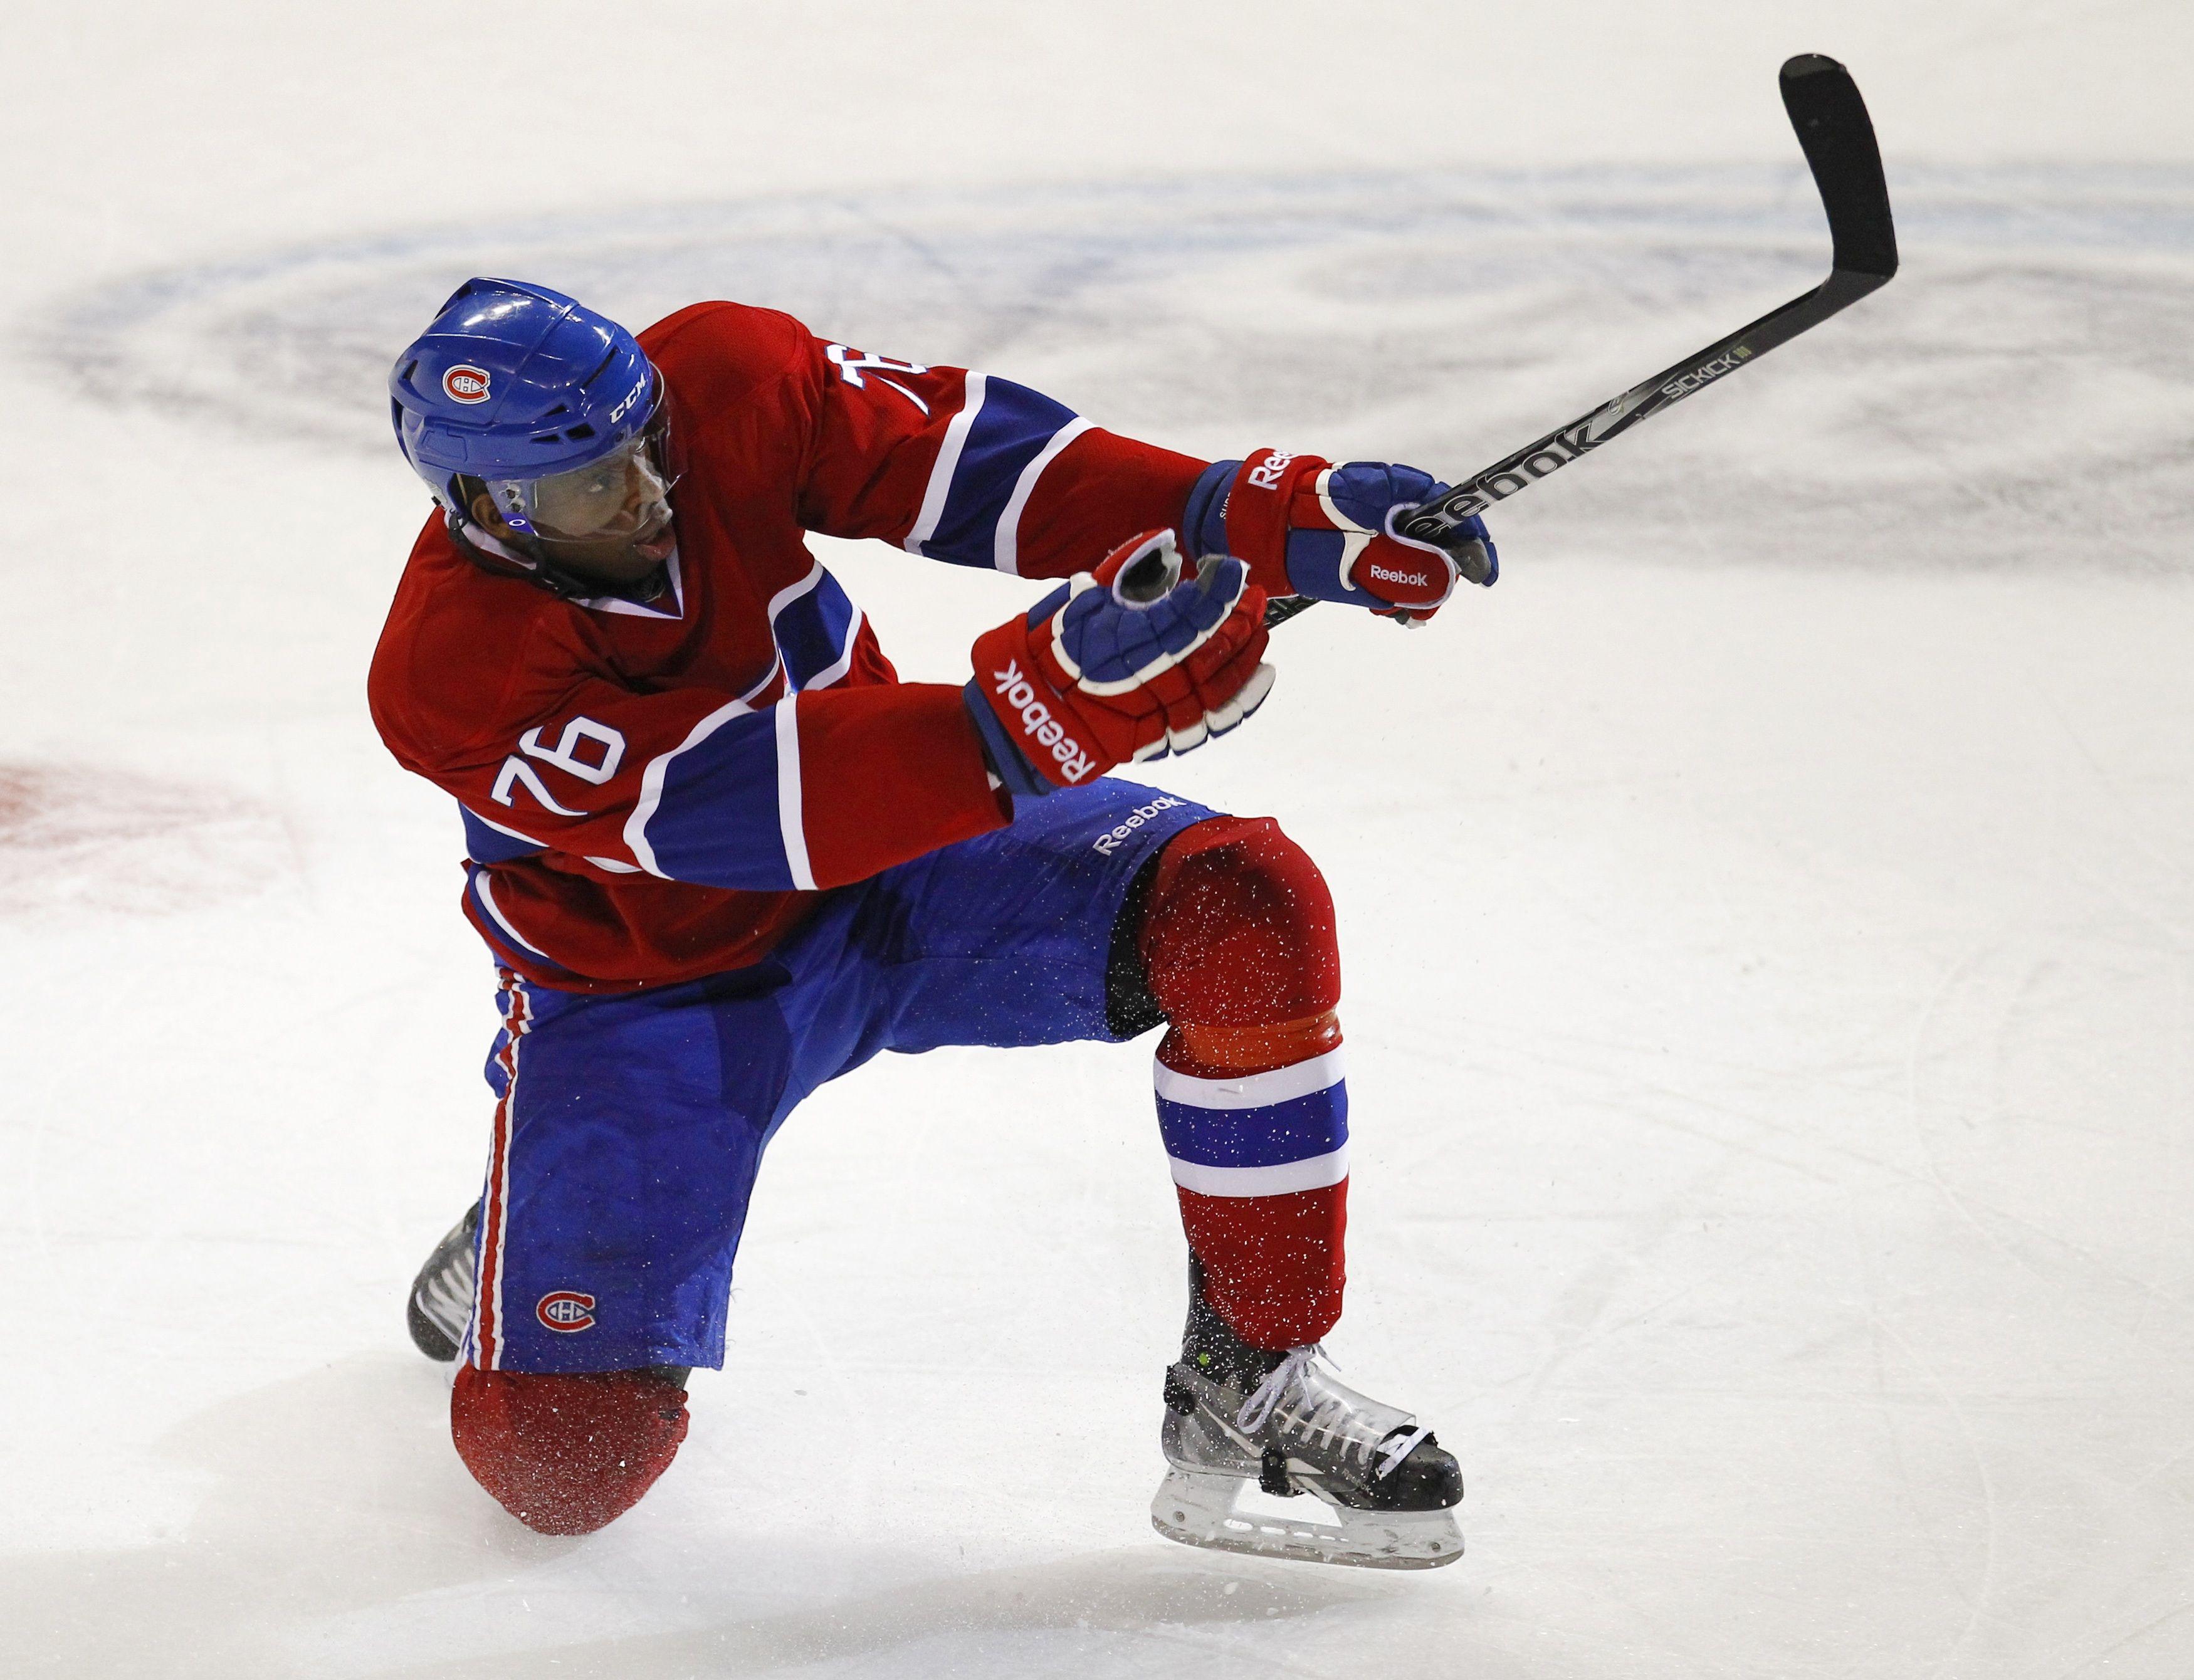 Bruins Habs: P.K. Subban's Statement On Those Racist Idiots Is